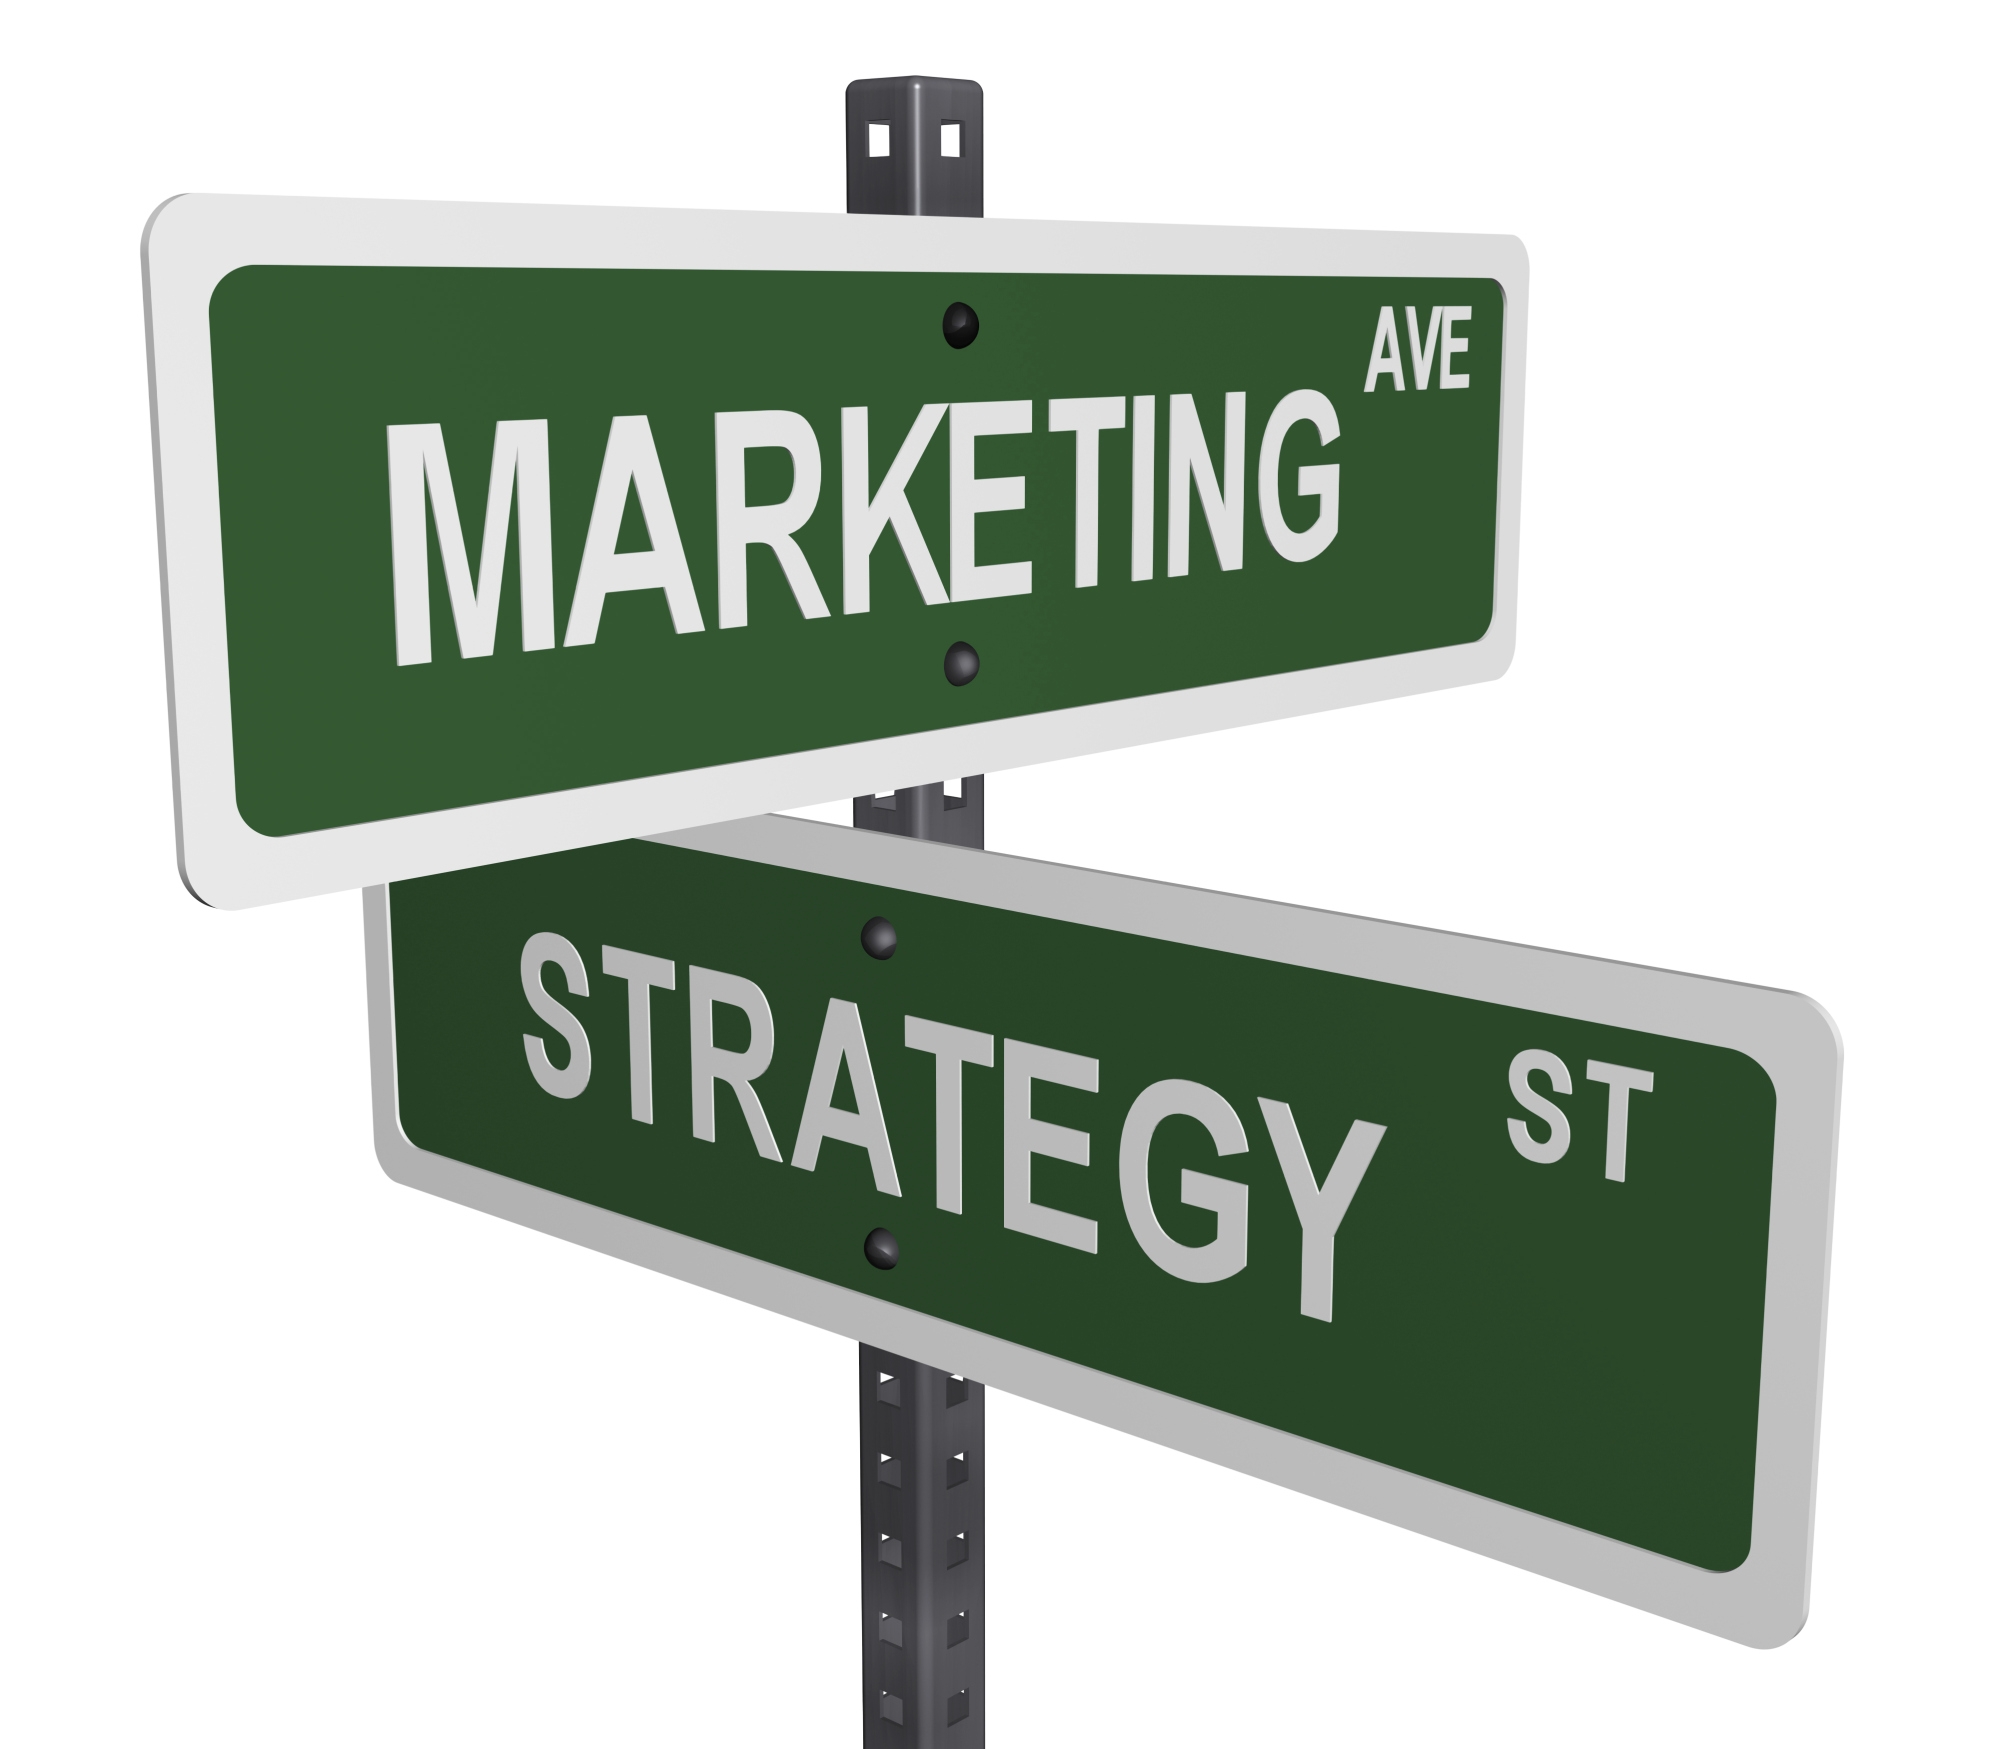 Street sign that says: "Marketing Strategy"